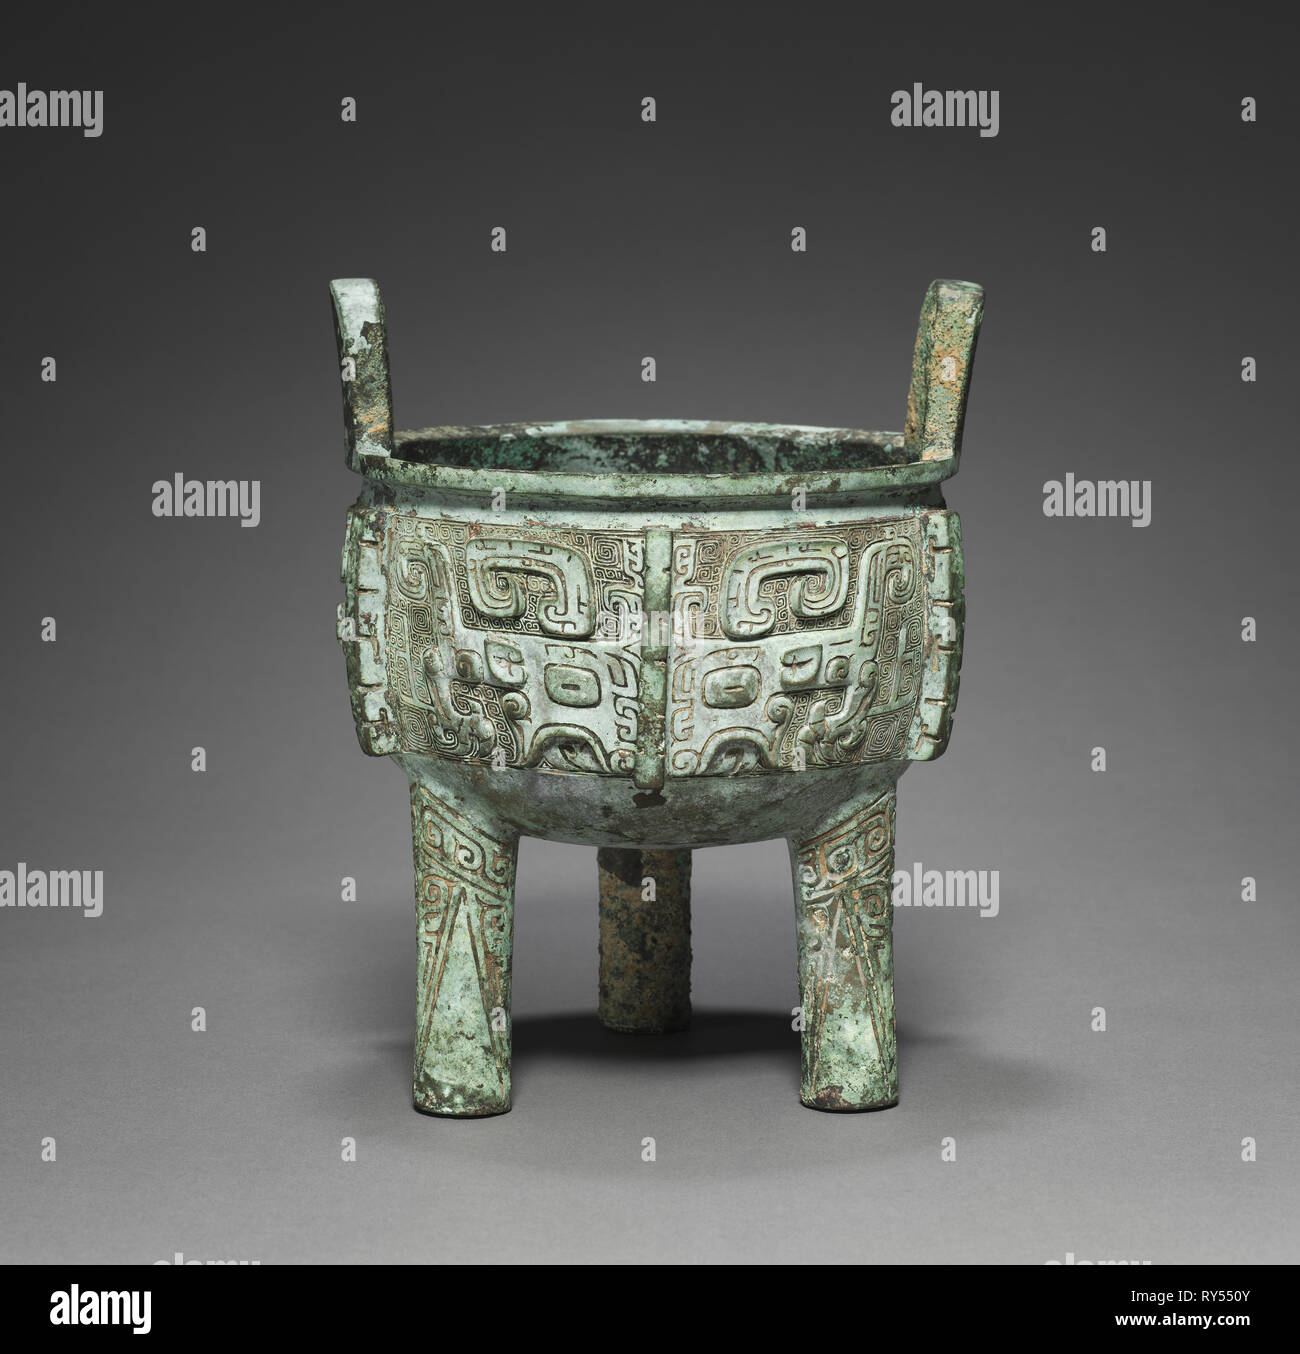 Tripod (Ding), c. 1250-1046 BC. China, late Shang dynasty (c.1600-c.1046 BC), Anyang phase (c.1250-1046 BC). Bronze; overall: 24.5 x 20 cm (9 5/8 x 7 7/8 in Stock Photo